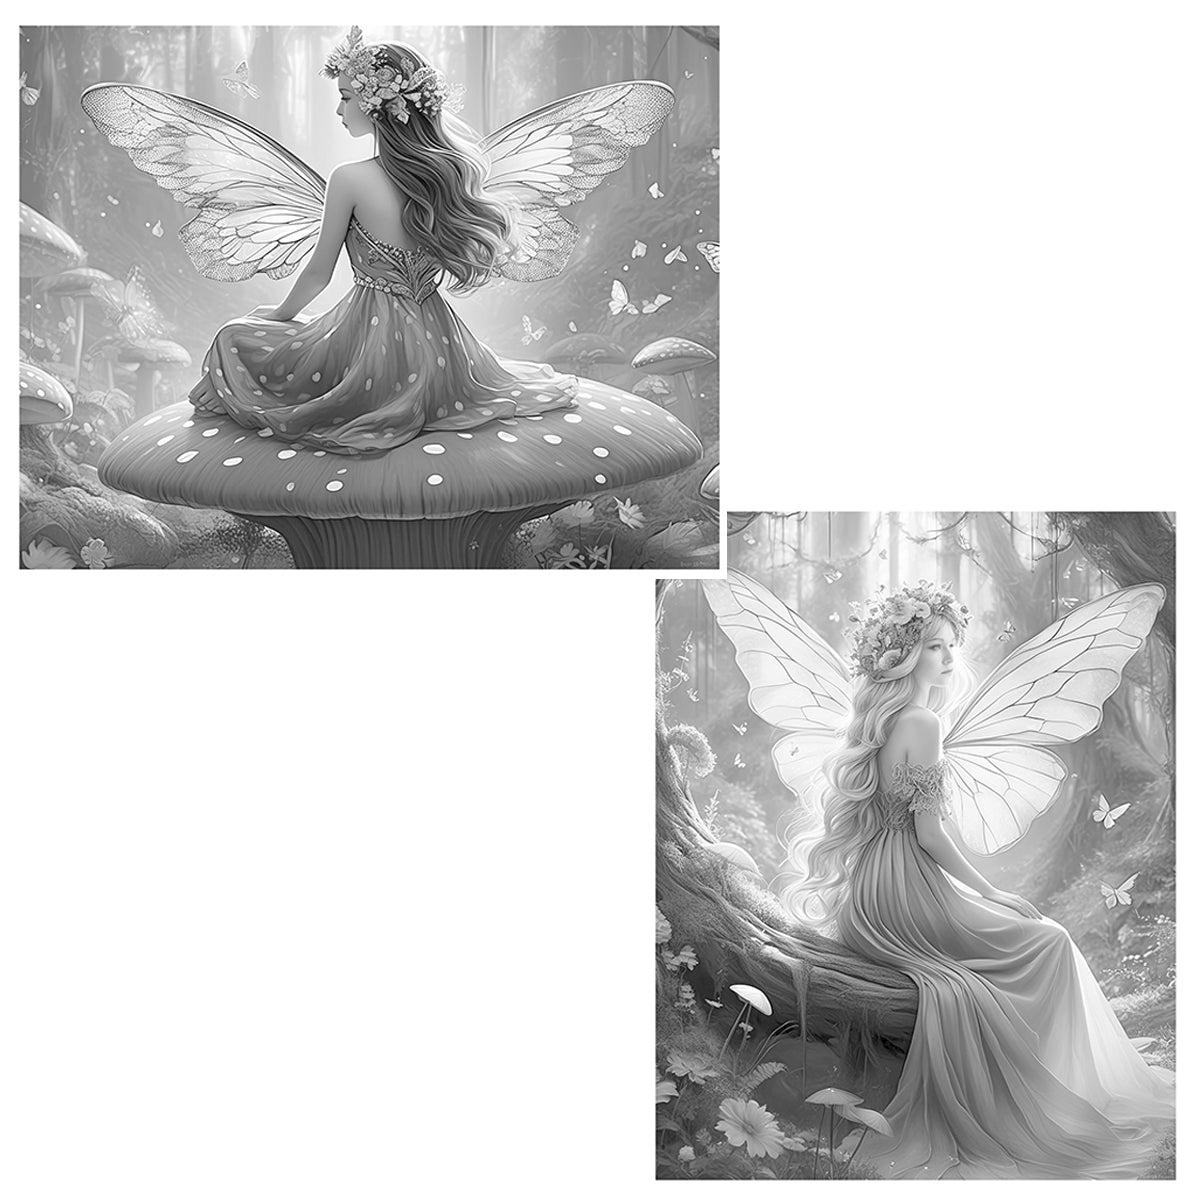 Great2bColorful - 16" x 20" Advanced Grayscale Coloring Sheets, 2 Pack Set - "Whimsical Fairies"